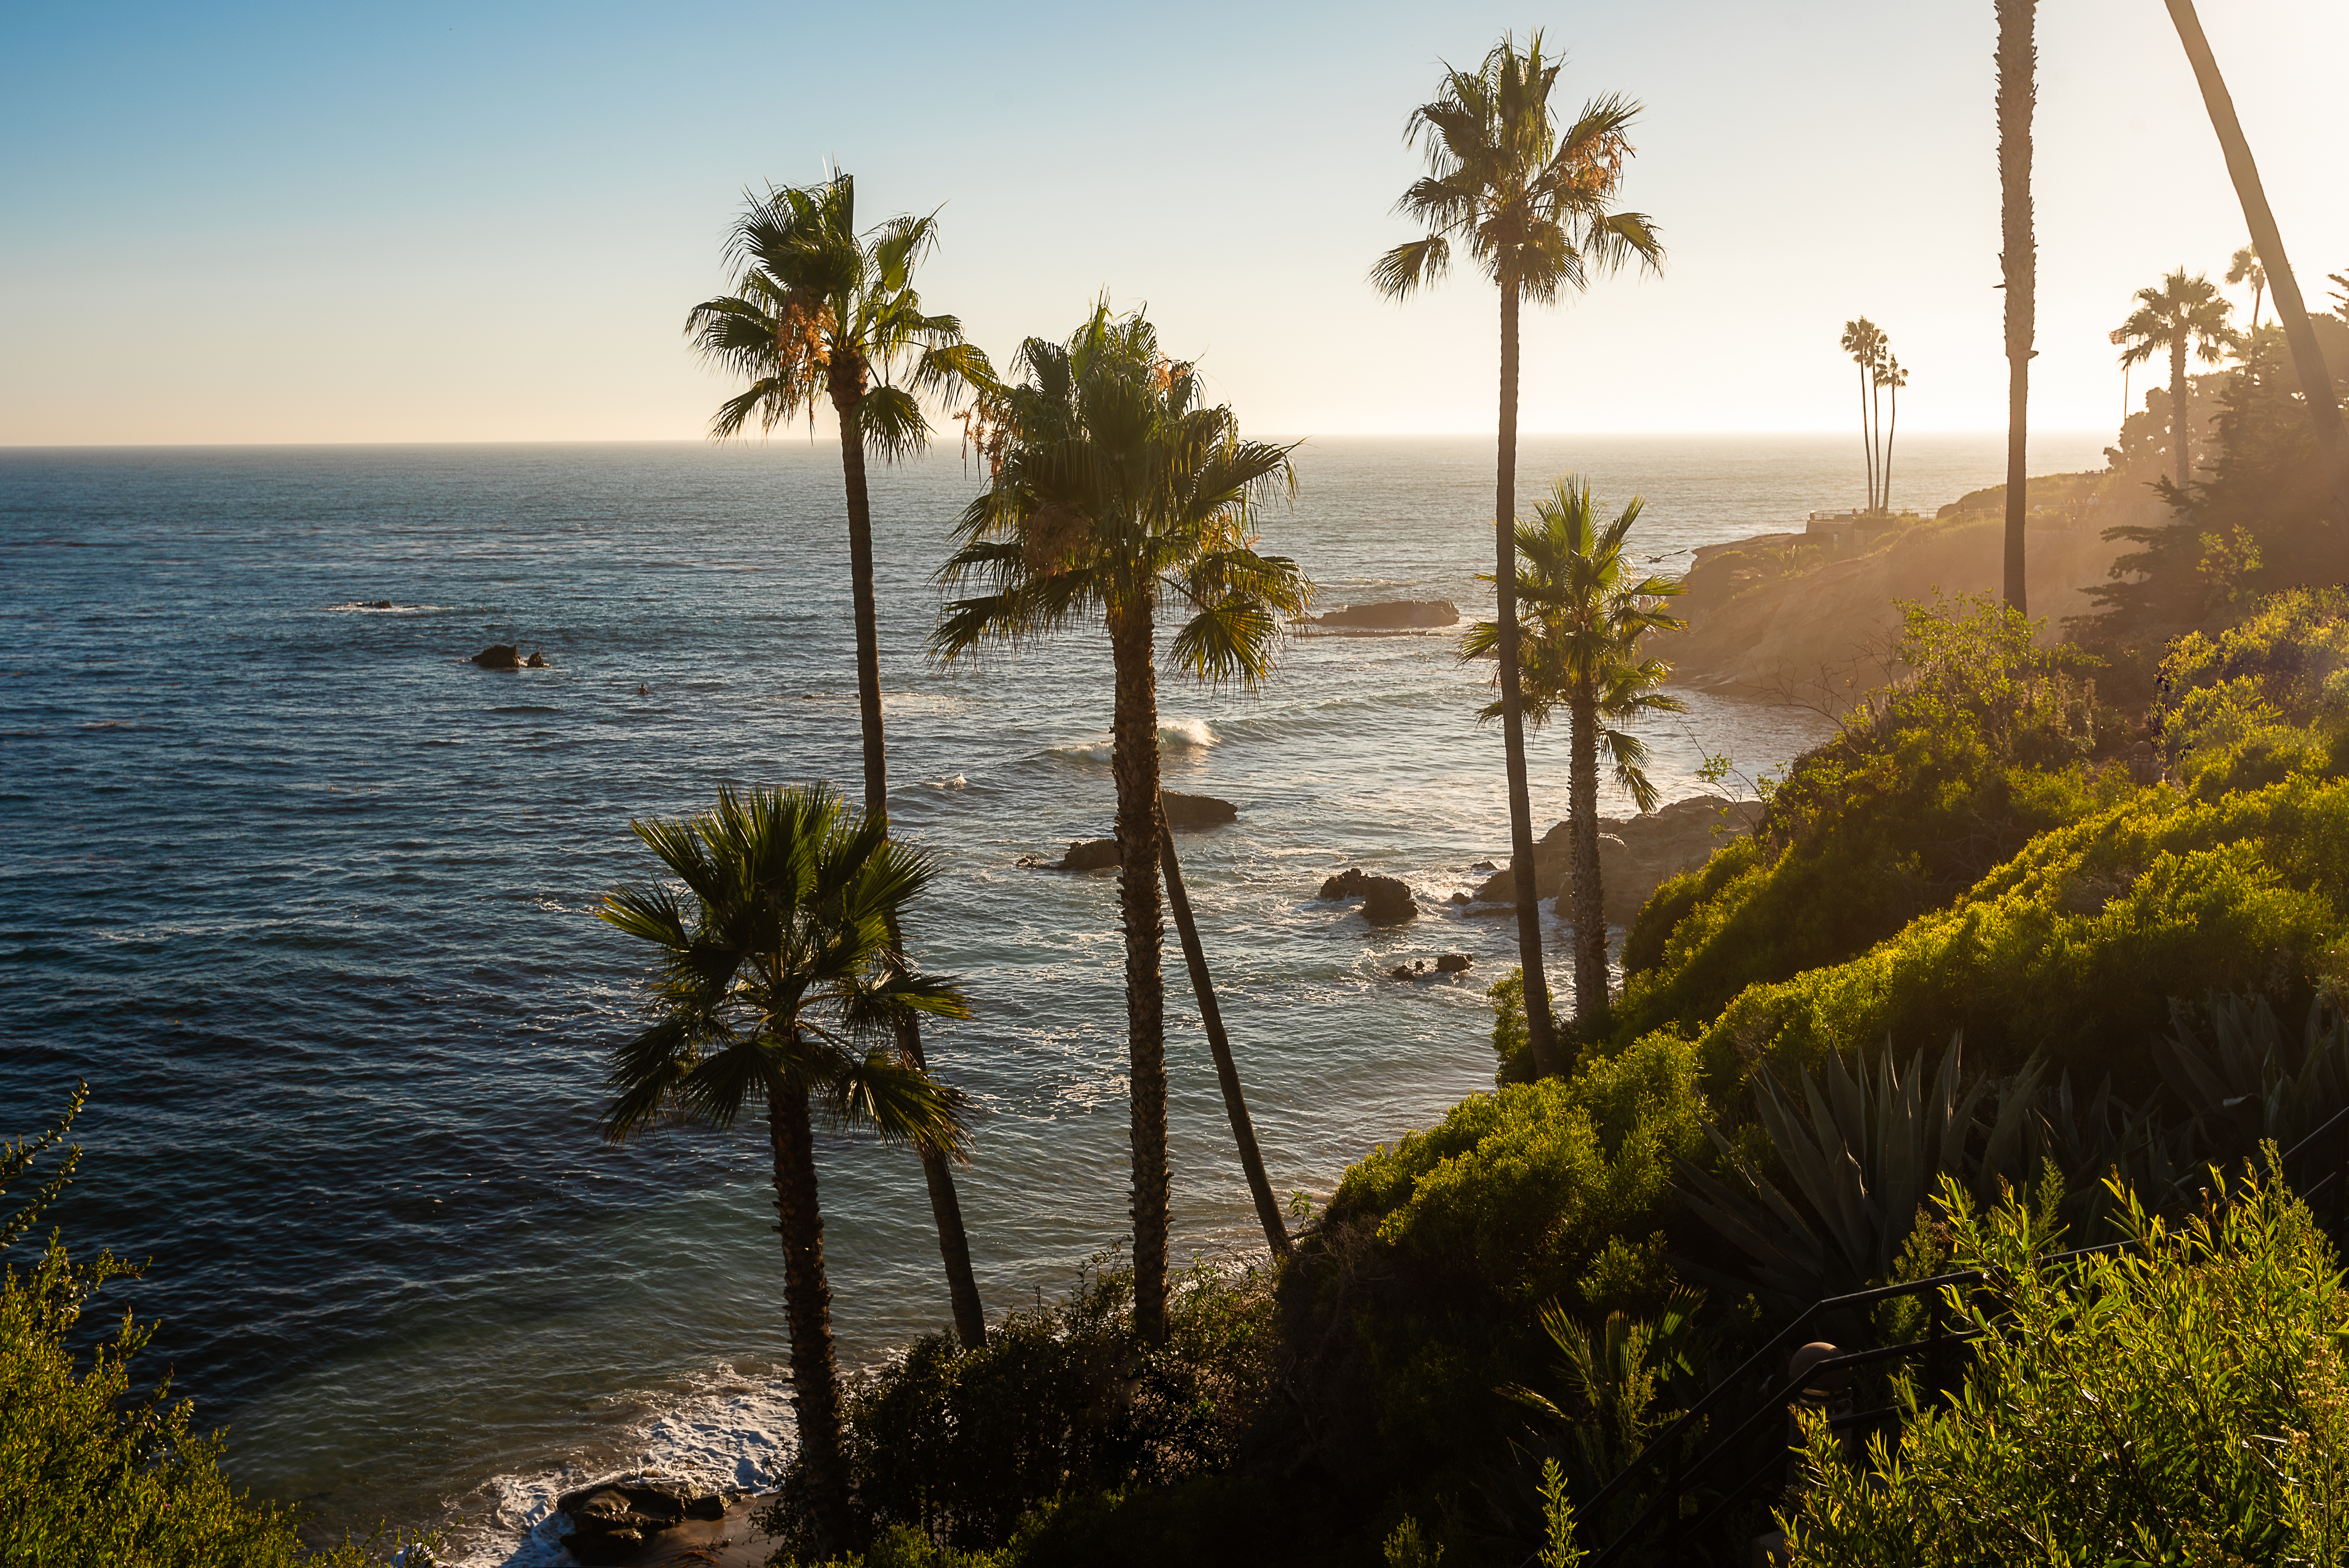 Palm trees and lush foliage overlook a tranquil sea at sunset